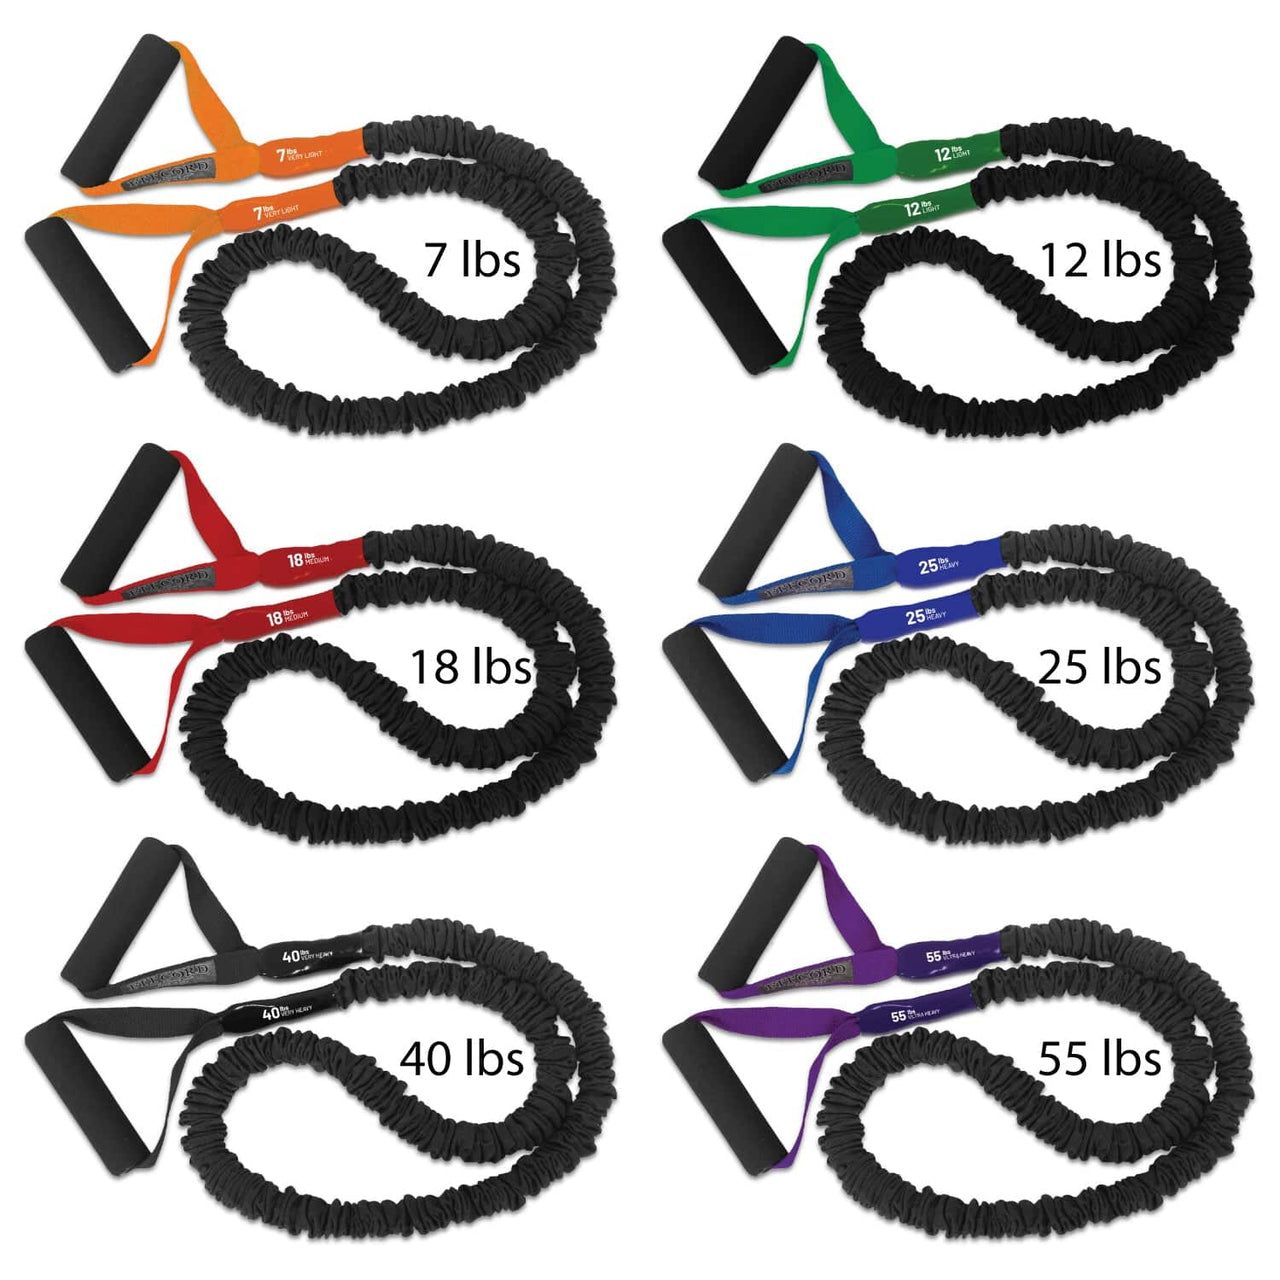 FitCord Resistance Band 6 Packs